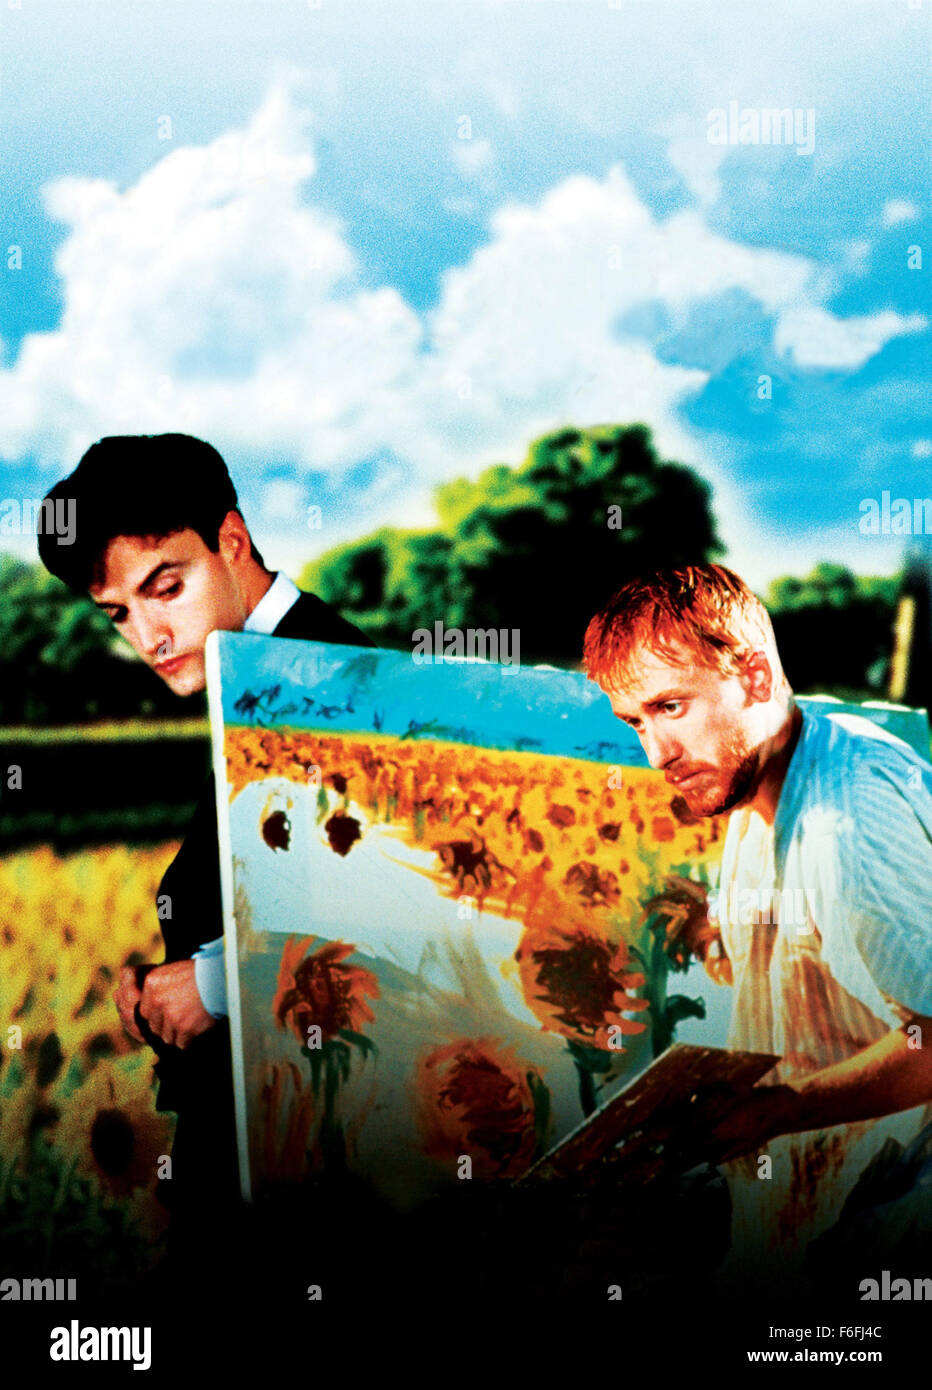 RELEASE DATE: November 2, 1990   MOVIE TITLE: Vincent & Theo   STUDIO: Arena Films   DIRECTOR: Robert Altman   PLOT: The familiar tragic story of Vincent van Gogh is broadened by focusing as well on his brother Theodore, who helped support Vincent. The movie also provides a nice view of the locations which Vincent painted.   PICTURED: TIM ROTH as Vincent Van Gogh and PAUL RHYS as Theodore 'Theo' Van Gogh.   (Credit Image: c Arena Films/Entertainment Pictures) Stock Photo